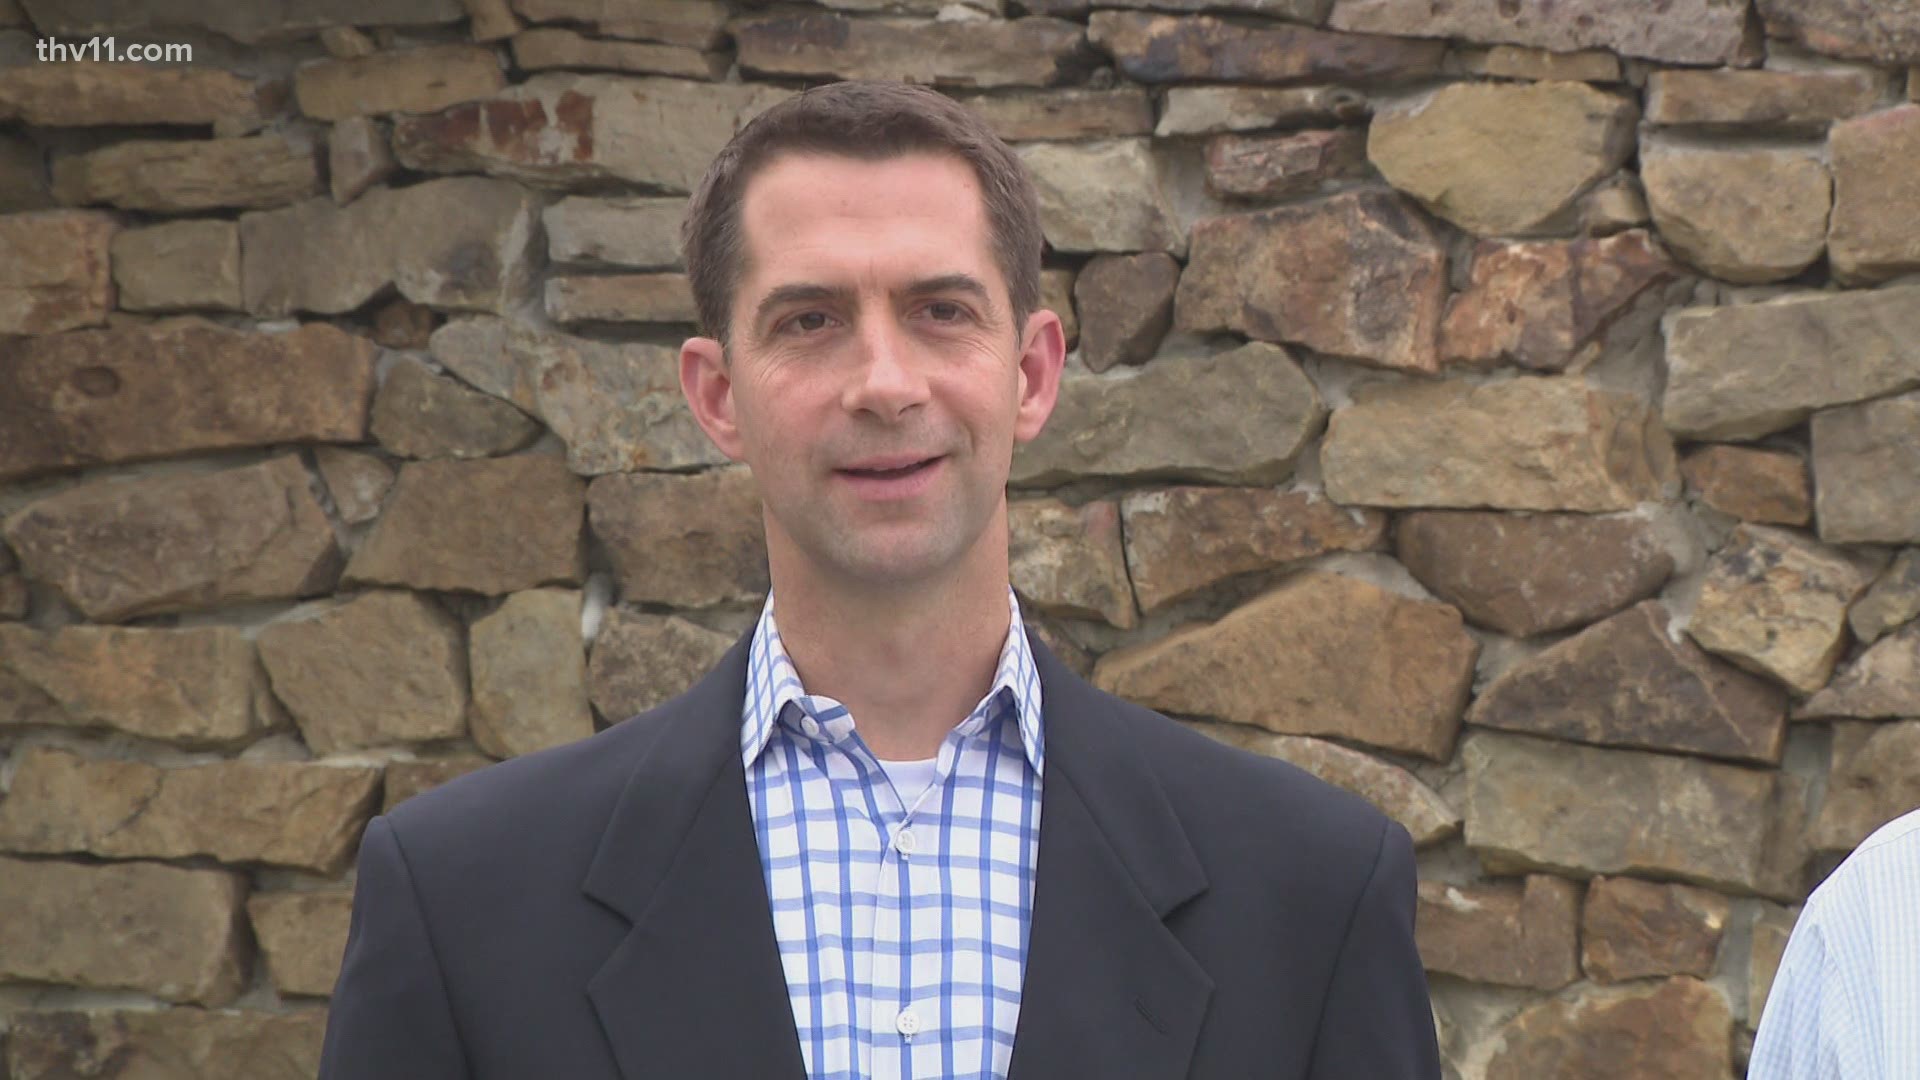 Arkansas highways and bridges are a big talking point today as Senator Tom Cotton, Senator John Boozman, and Rep. French Hill visited the Little Rock Por